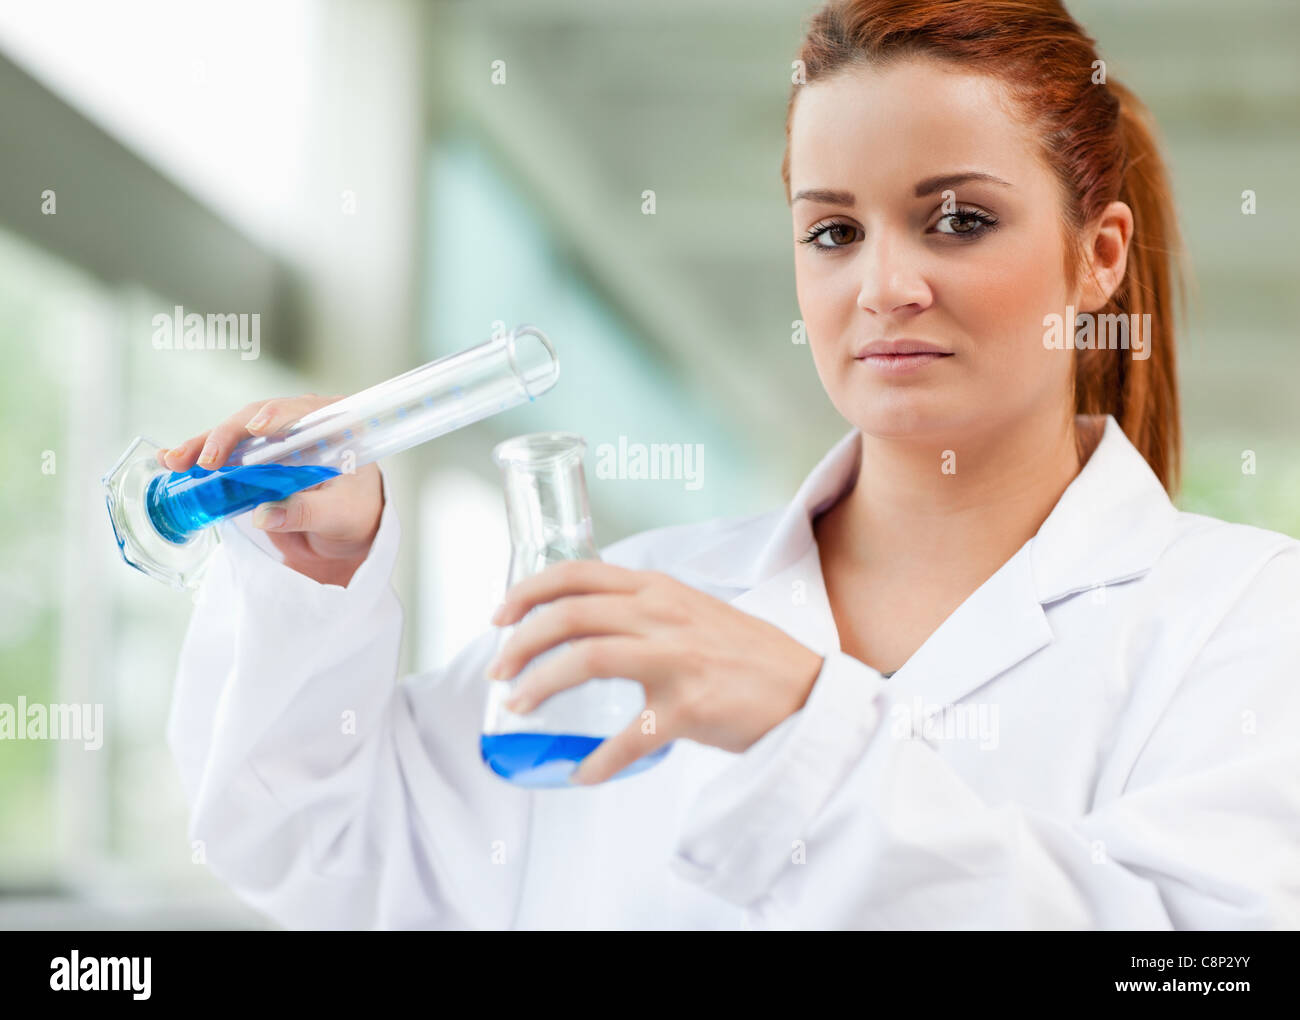 Cute scientist pouring blue liquid in an Erlenmeyer flask Stock Photo